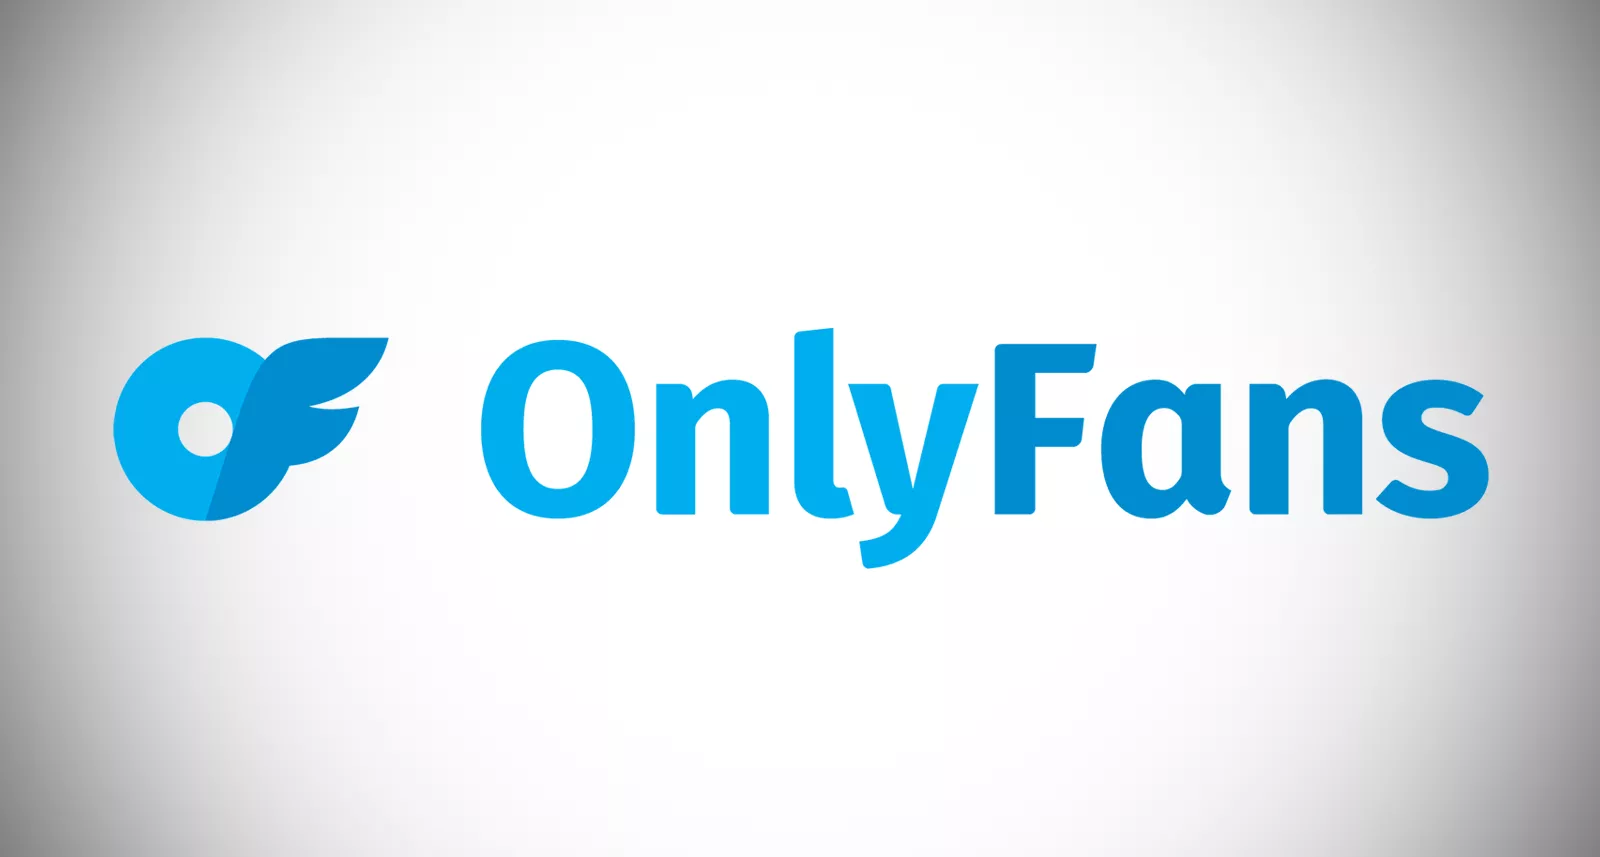 New OnlyFans Rules: Here's What You Can (and Can't) Do on the Platform